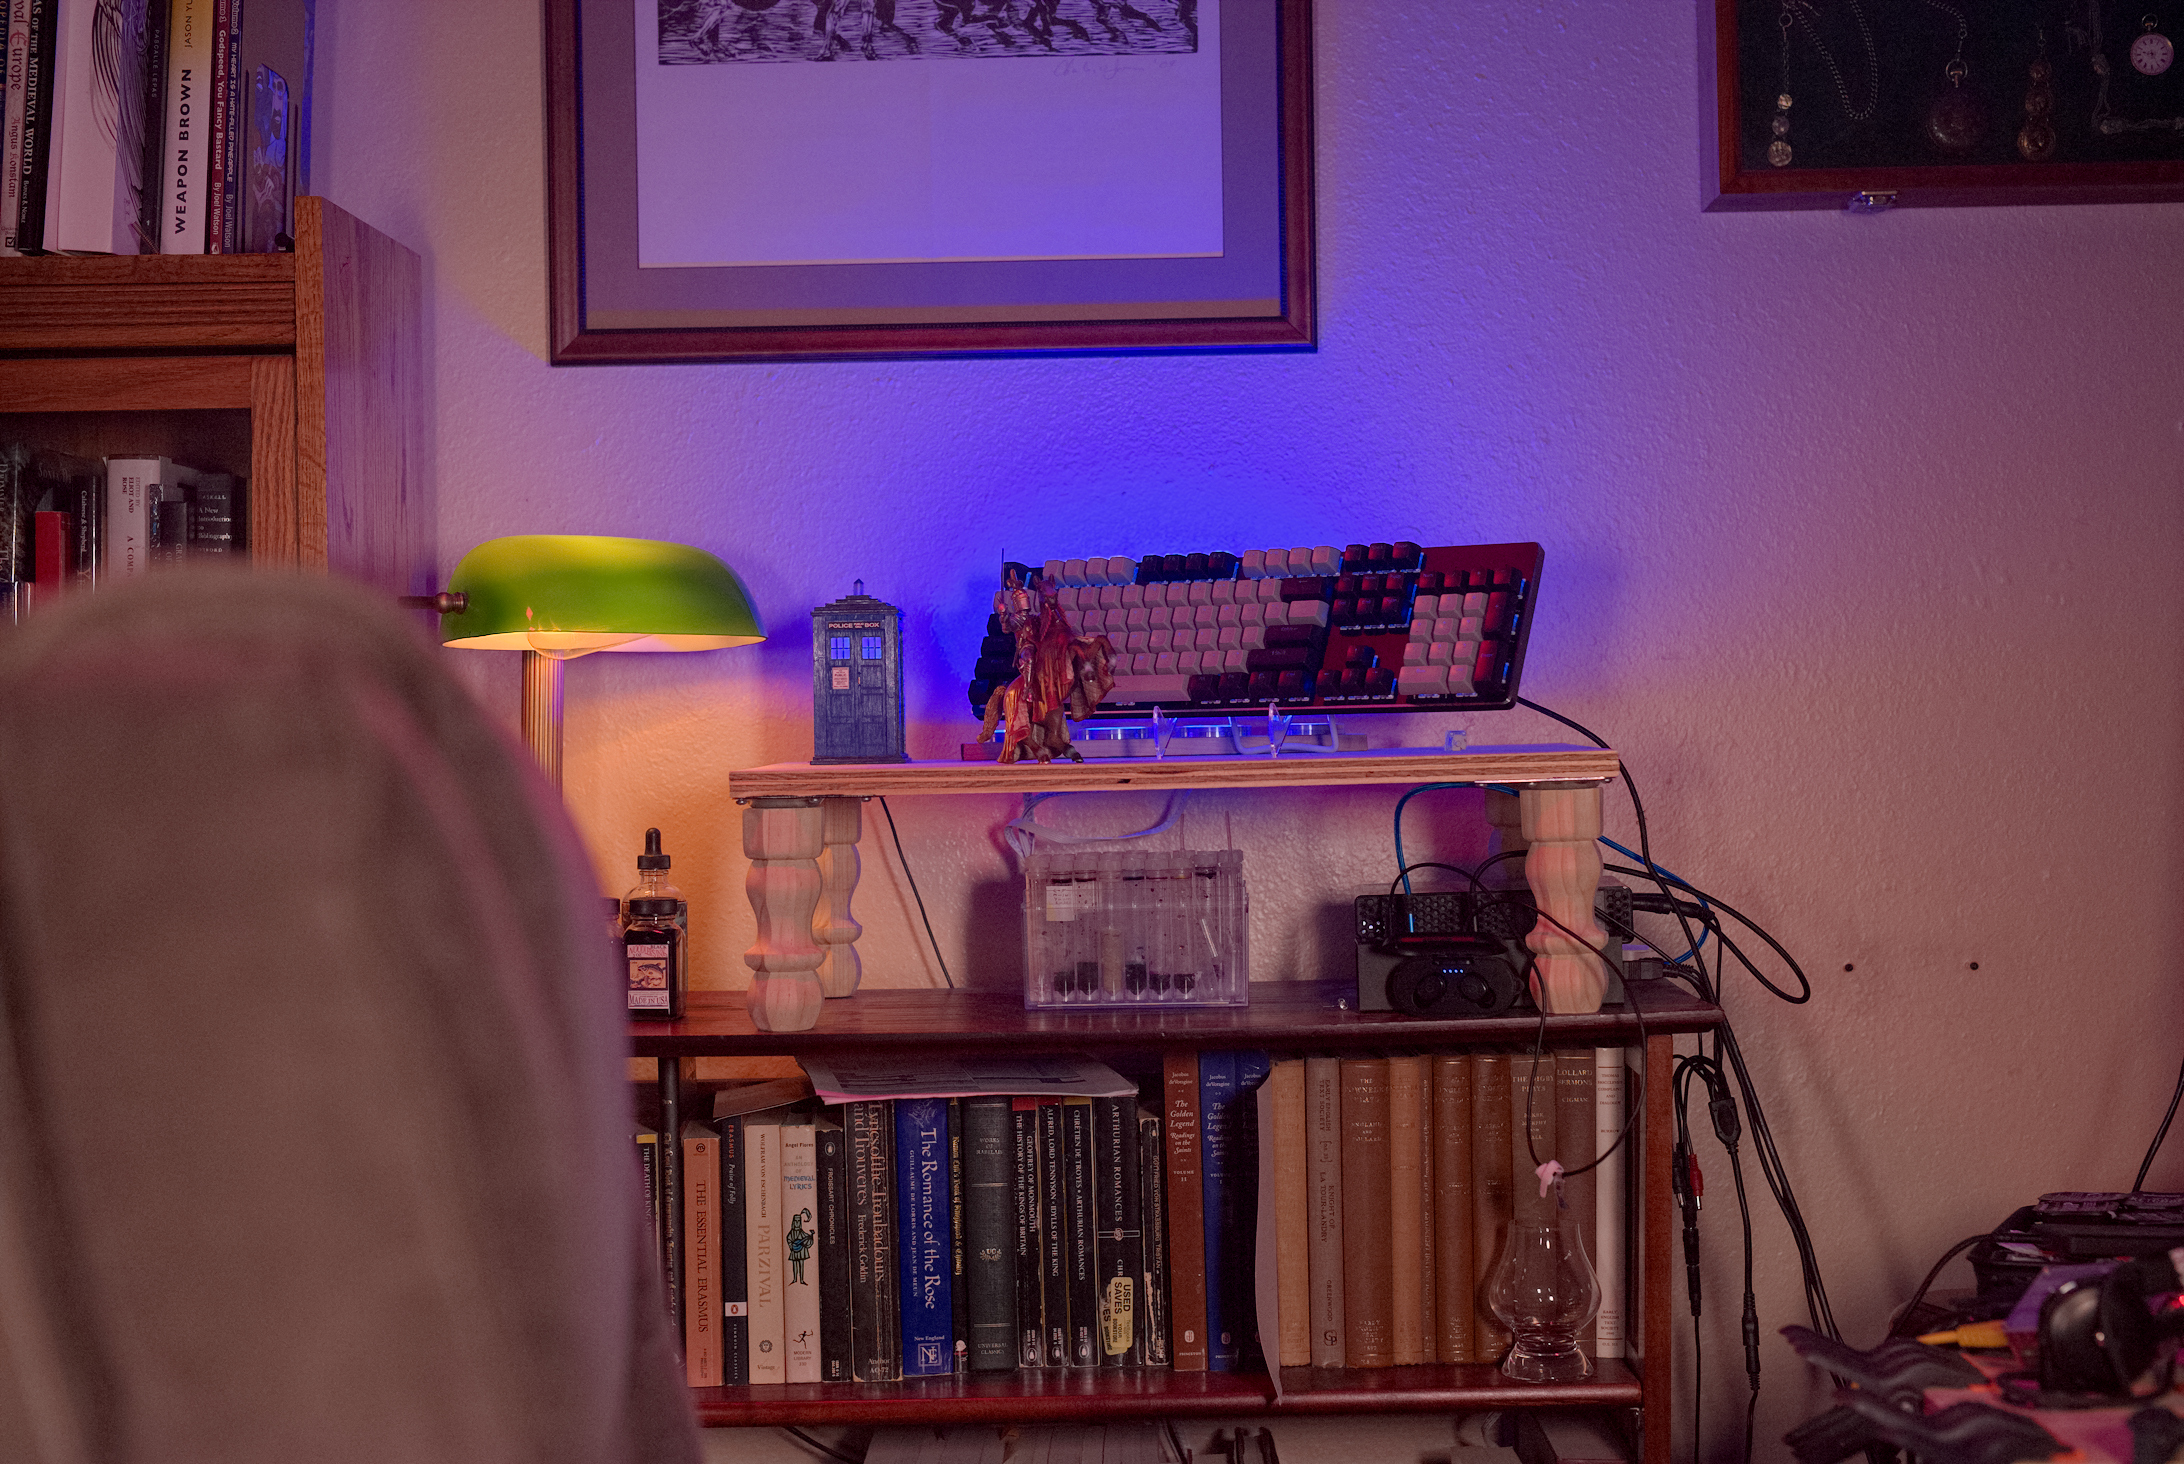 A picture of a chair turned to the side so you can see various items on top of a bookcase, such as a keyboard, a lamp, some ink bottles, and a couple of hard drives.